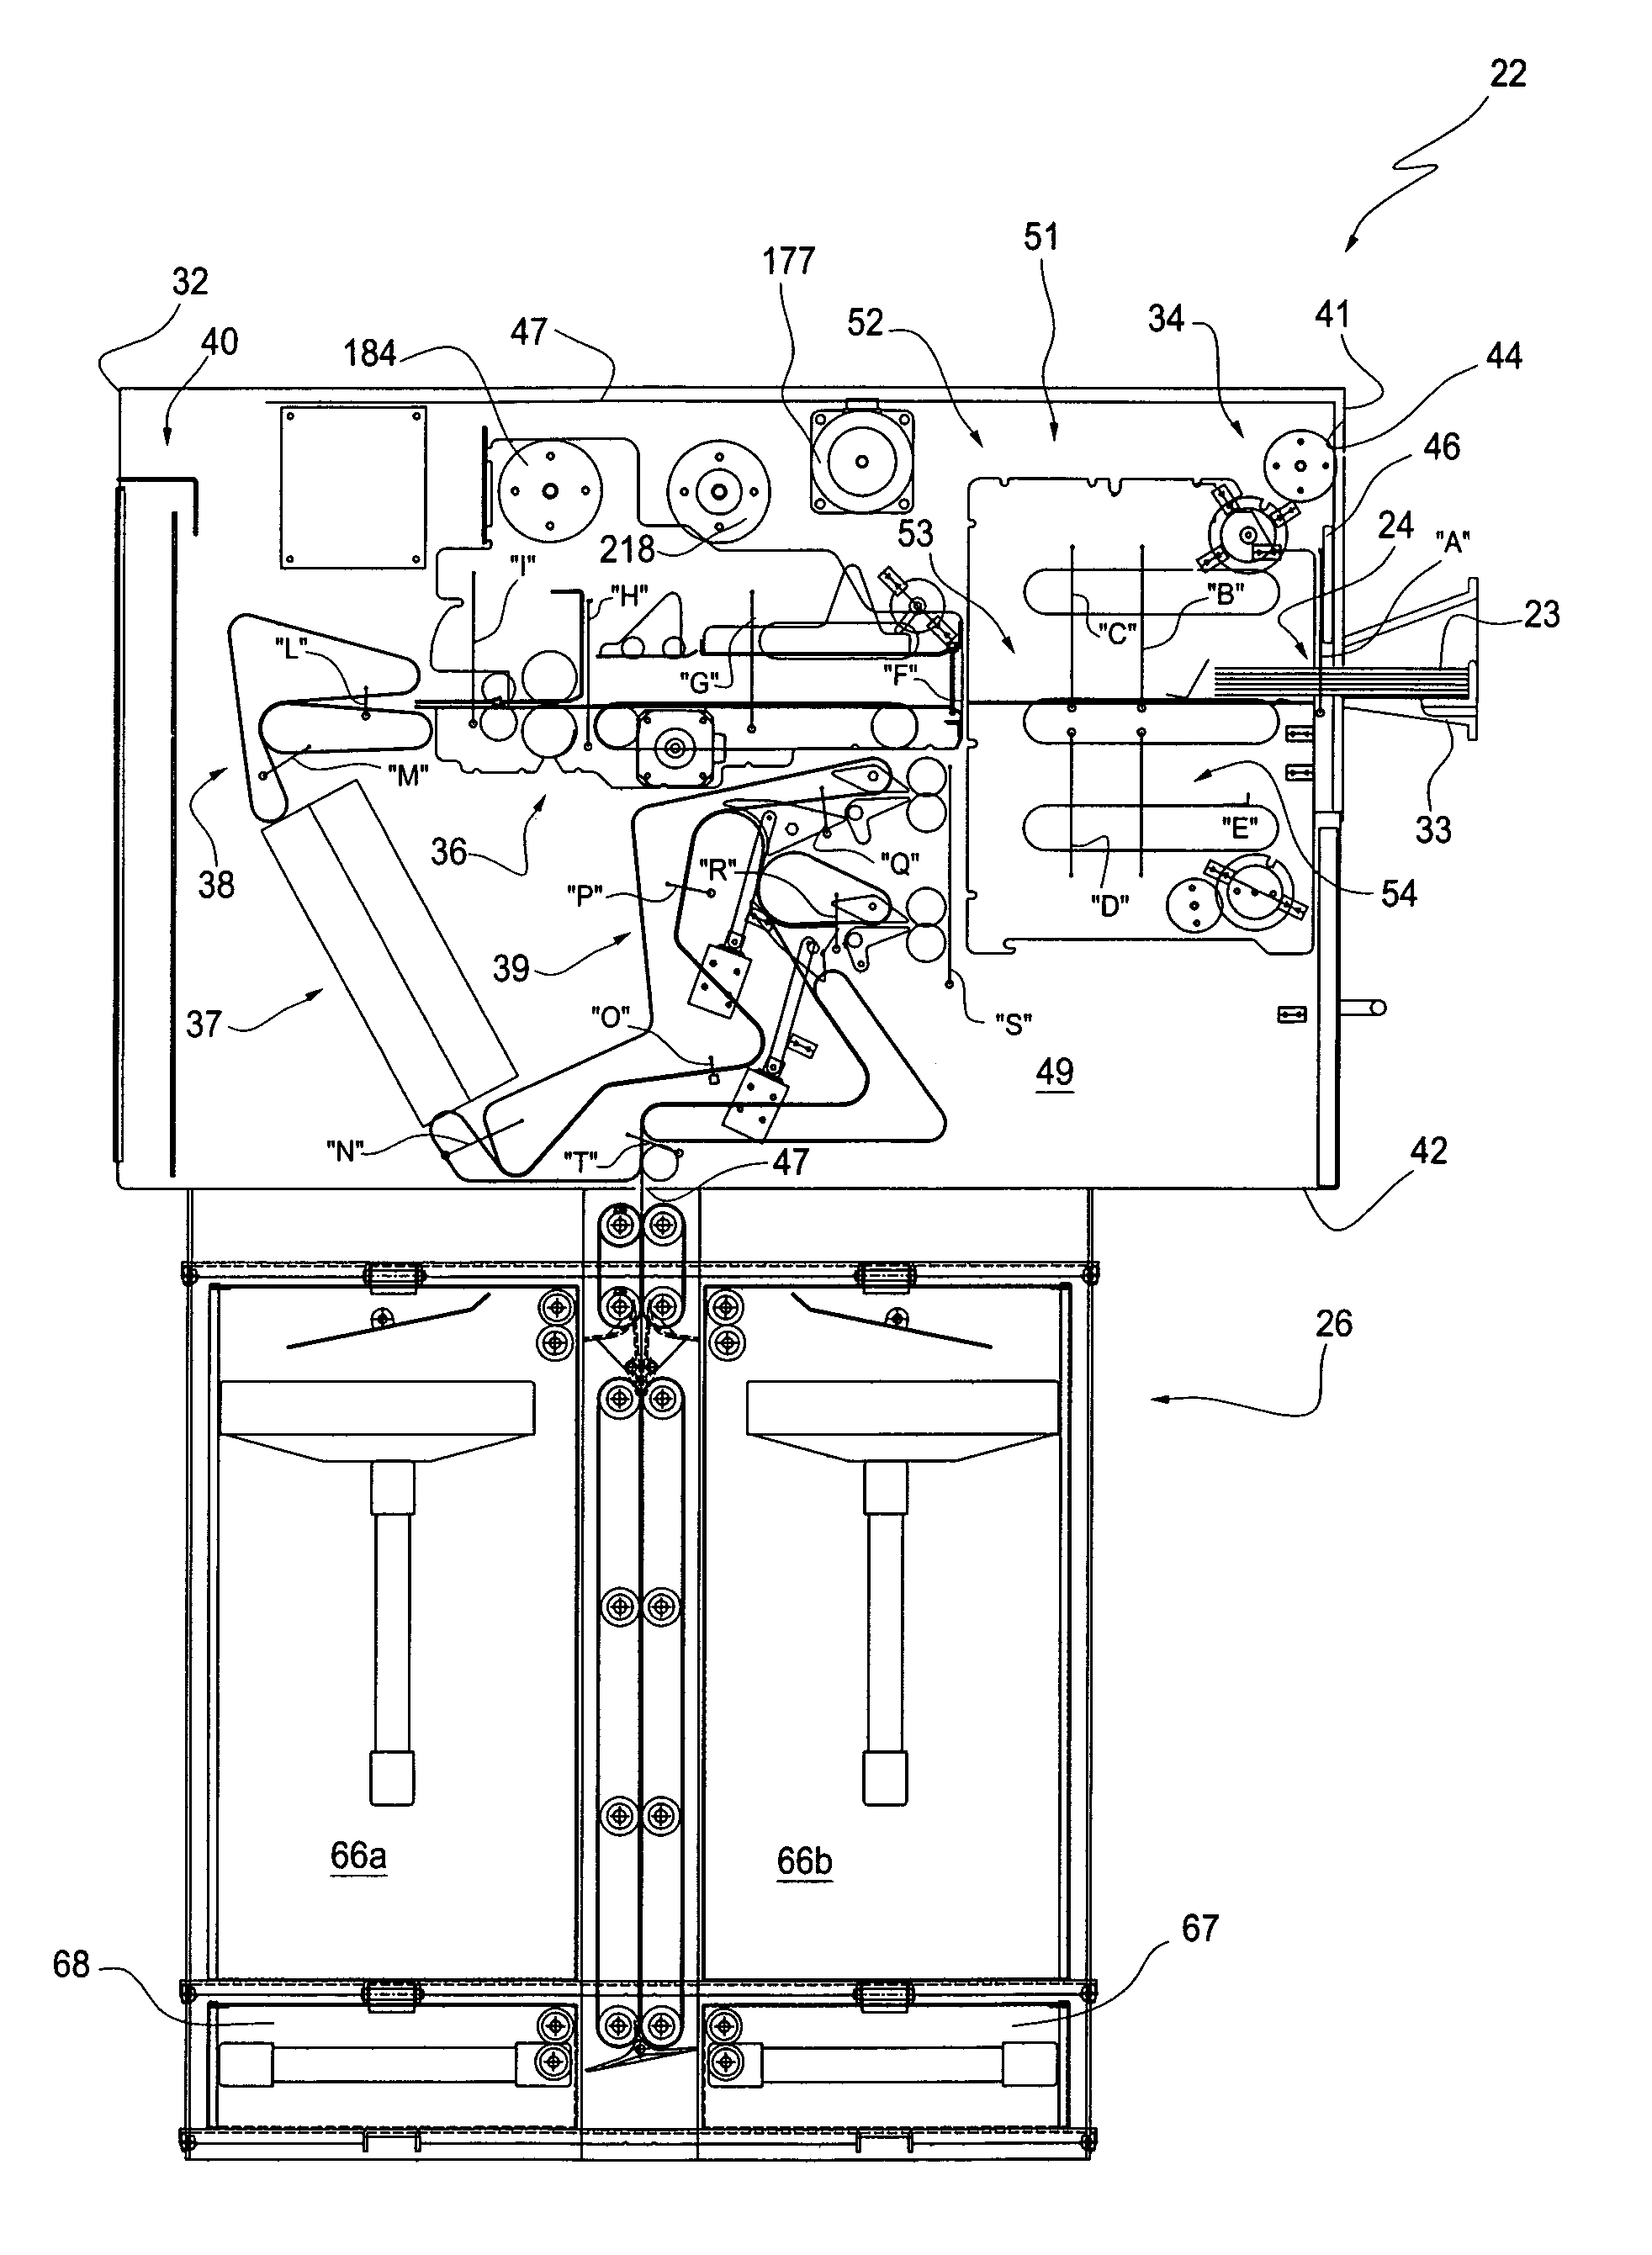 Equipment for the automatic deposit of banknotes